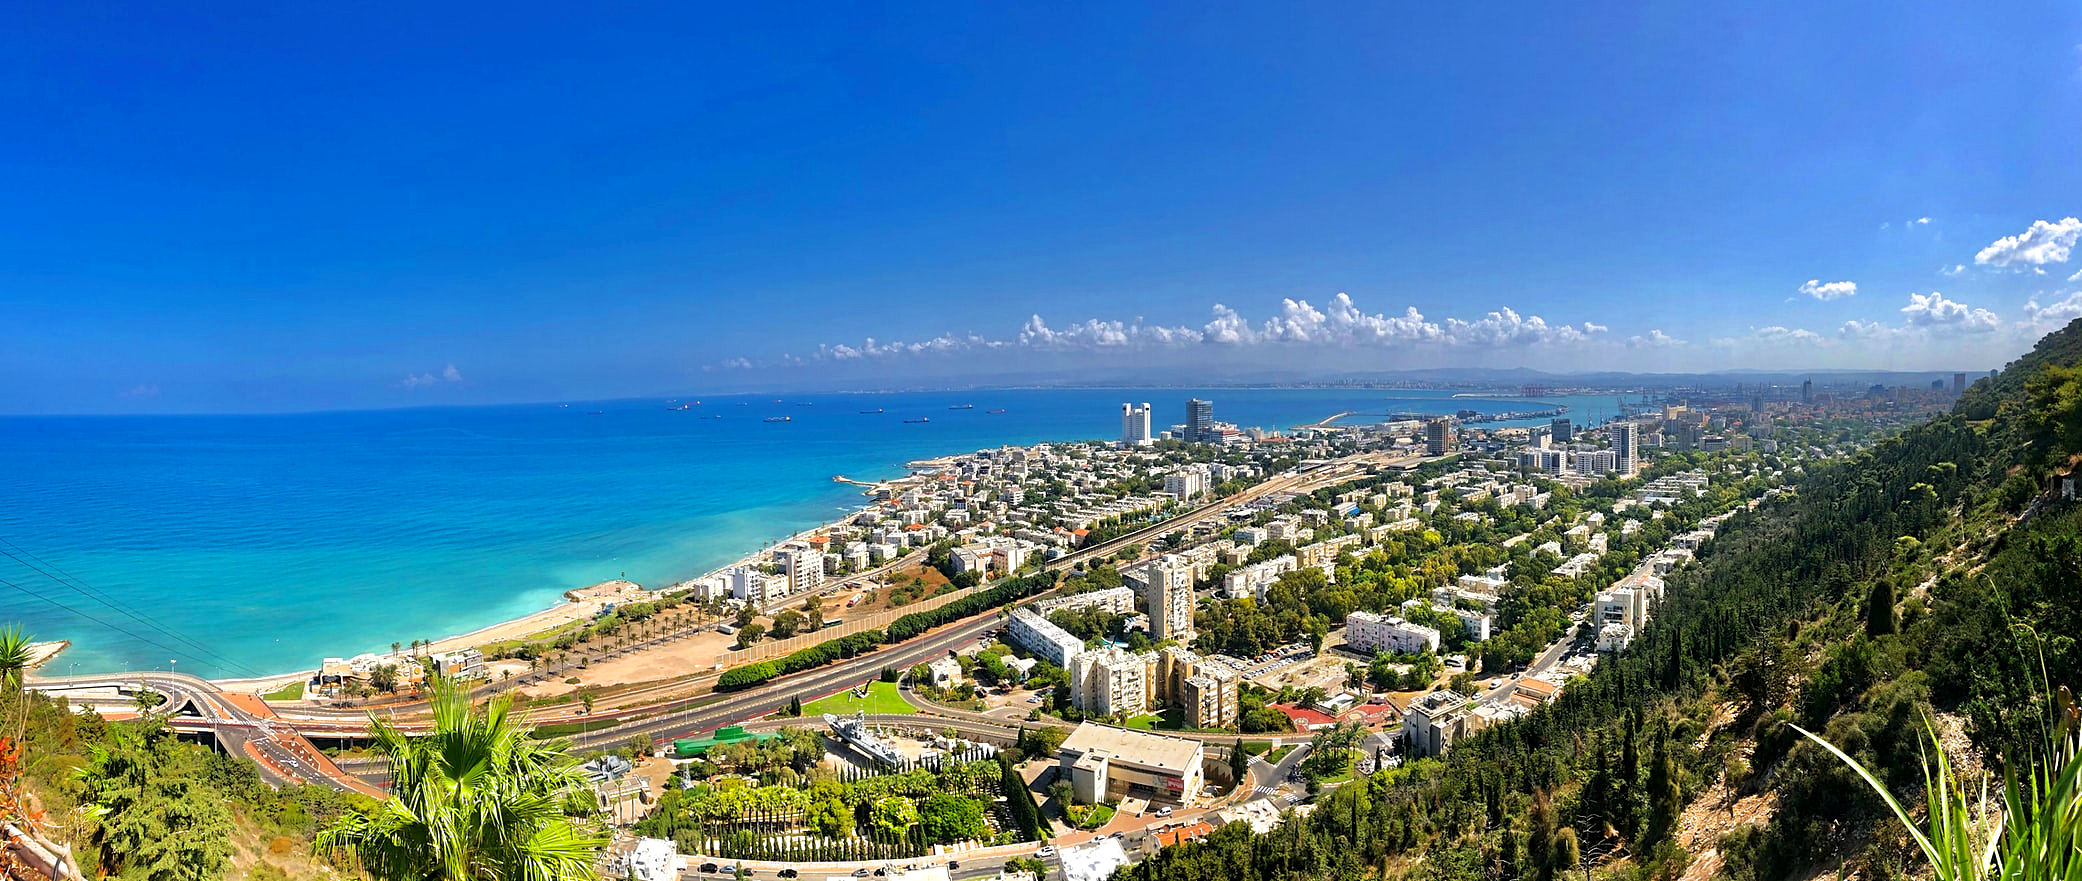 View of Haifa from the top of Mount Carmel